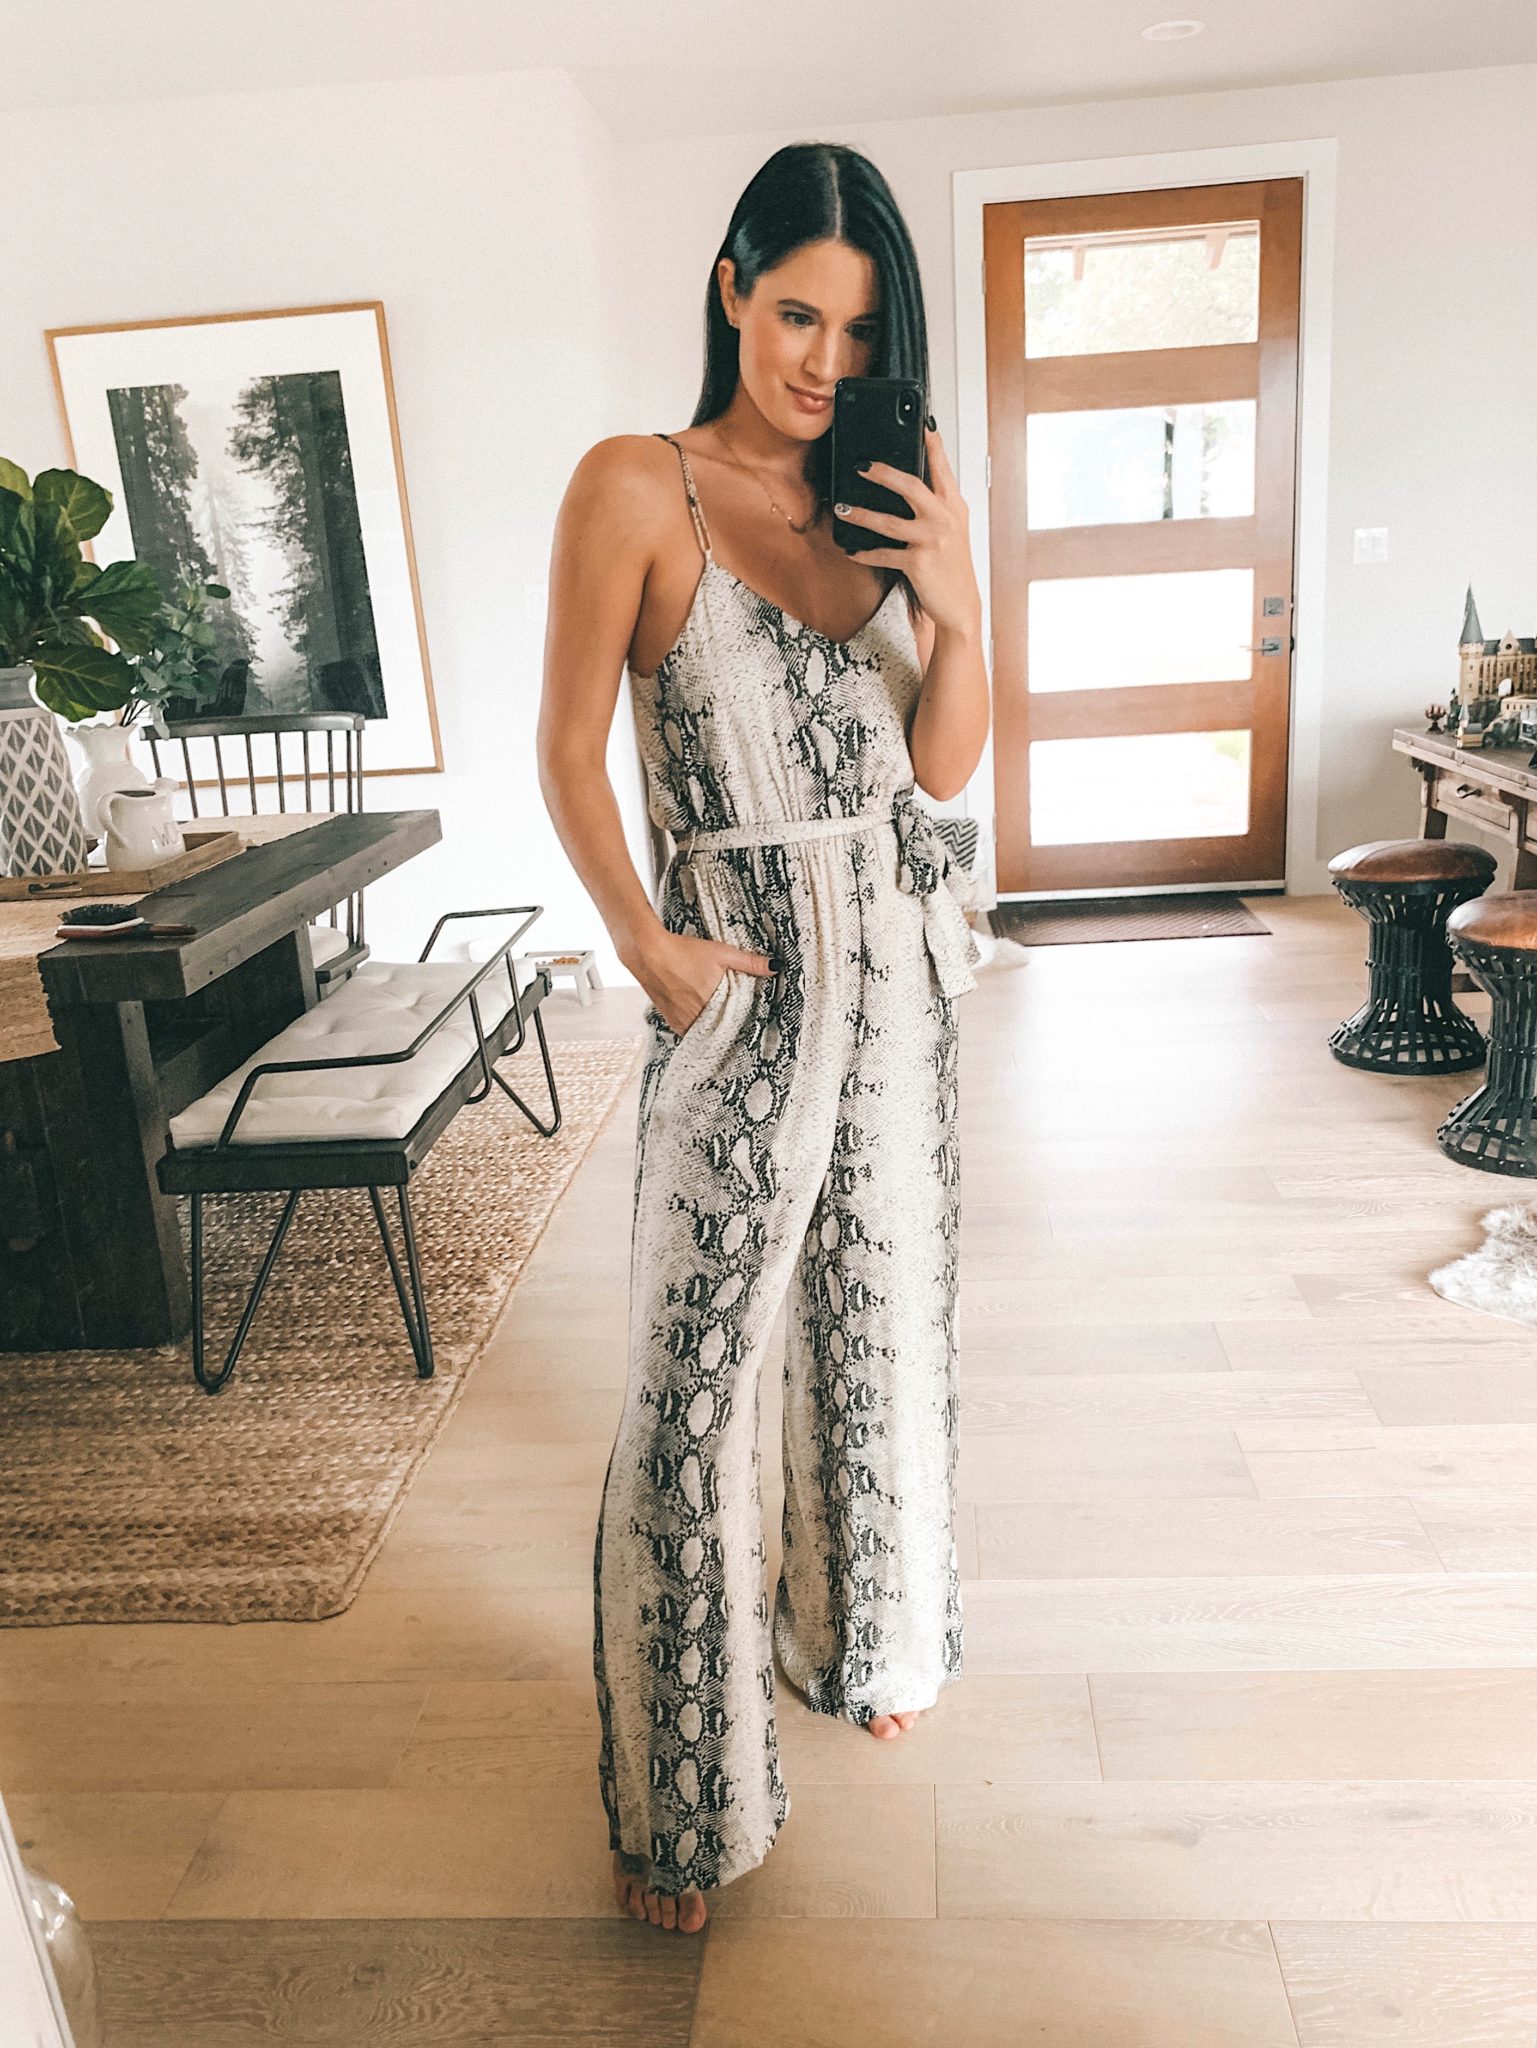 Lovestitch Fall Outfit Try-On Session by popular Austin fashion blog, Dressed to Kill: image of a woman wearing a Lovestitch Laras Snakeskin Print Jumpsuit.